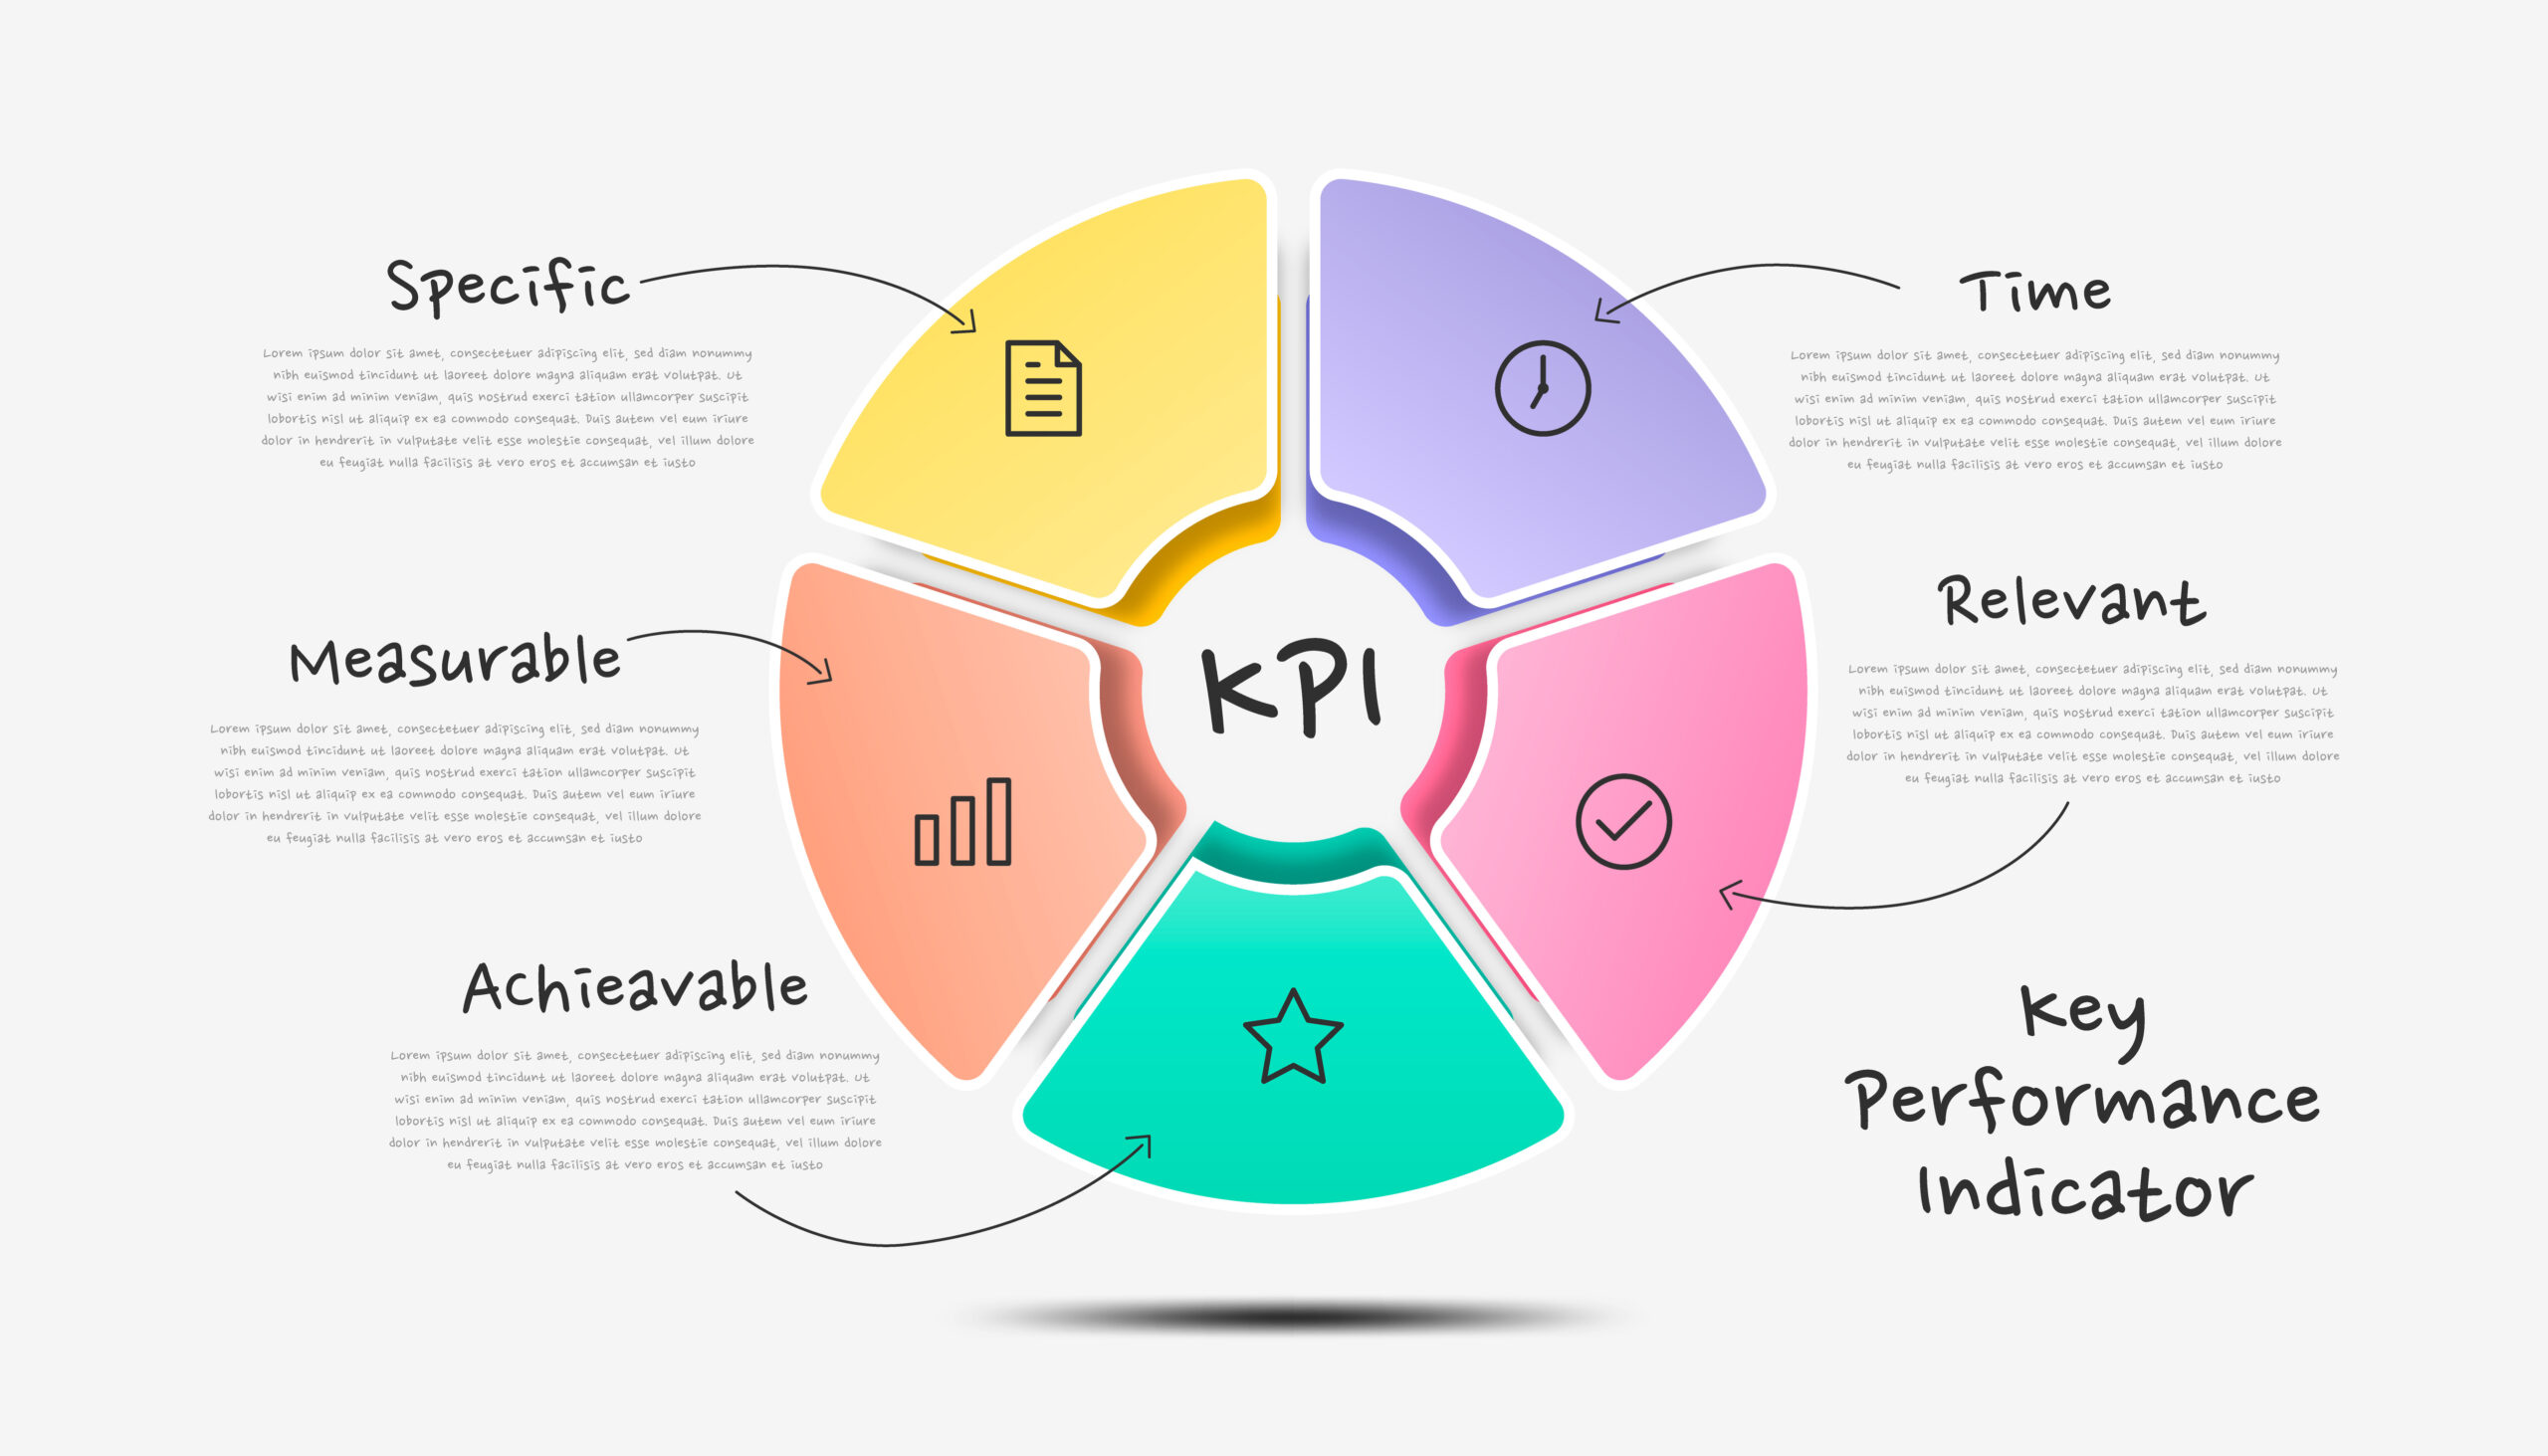 Infographic kpi key performance indicator. Colorful modern timeline infographic template.